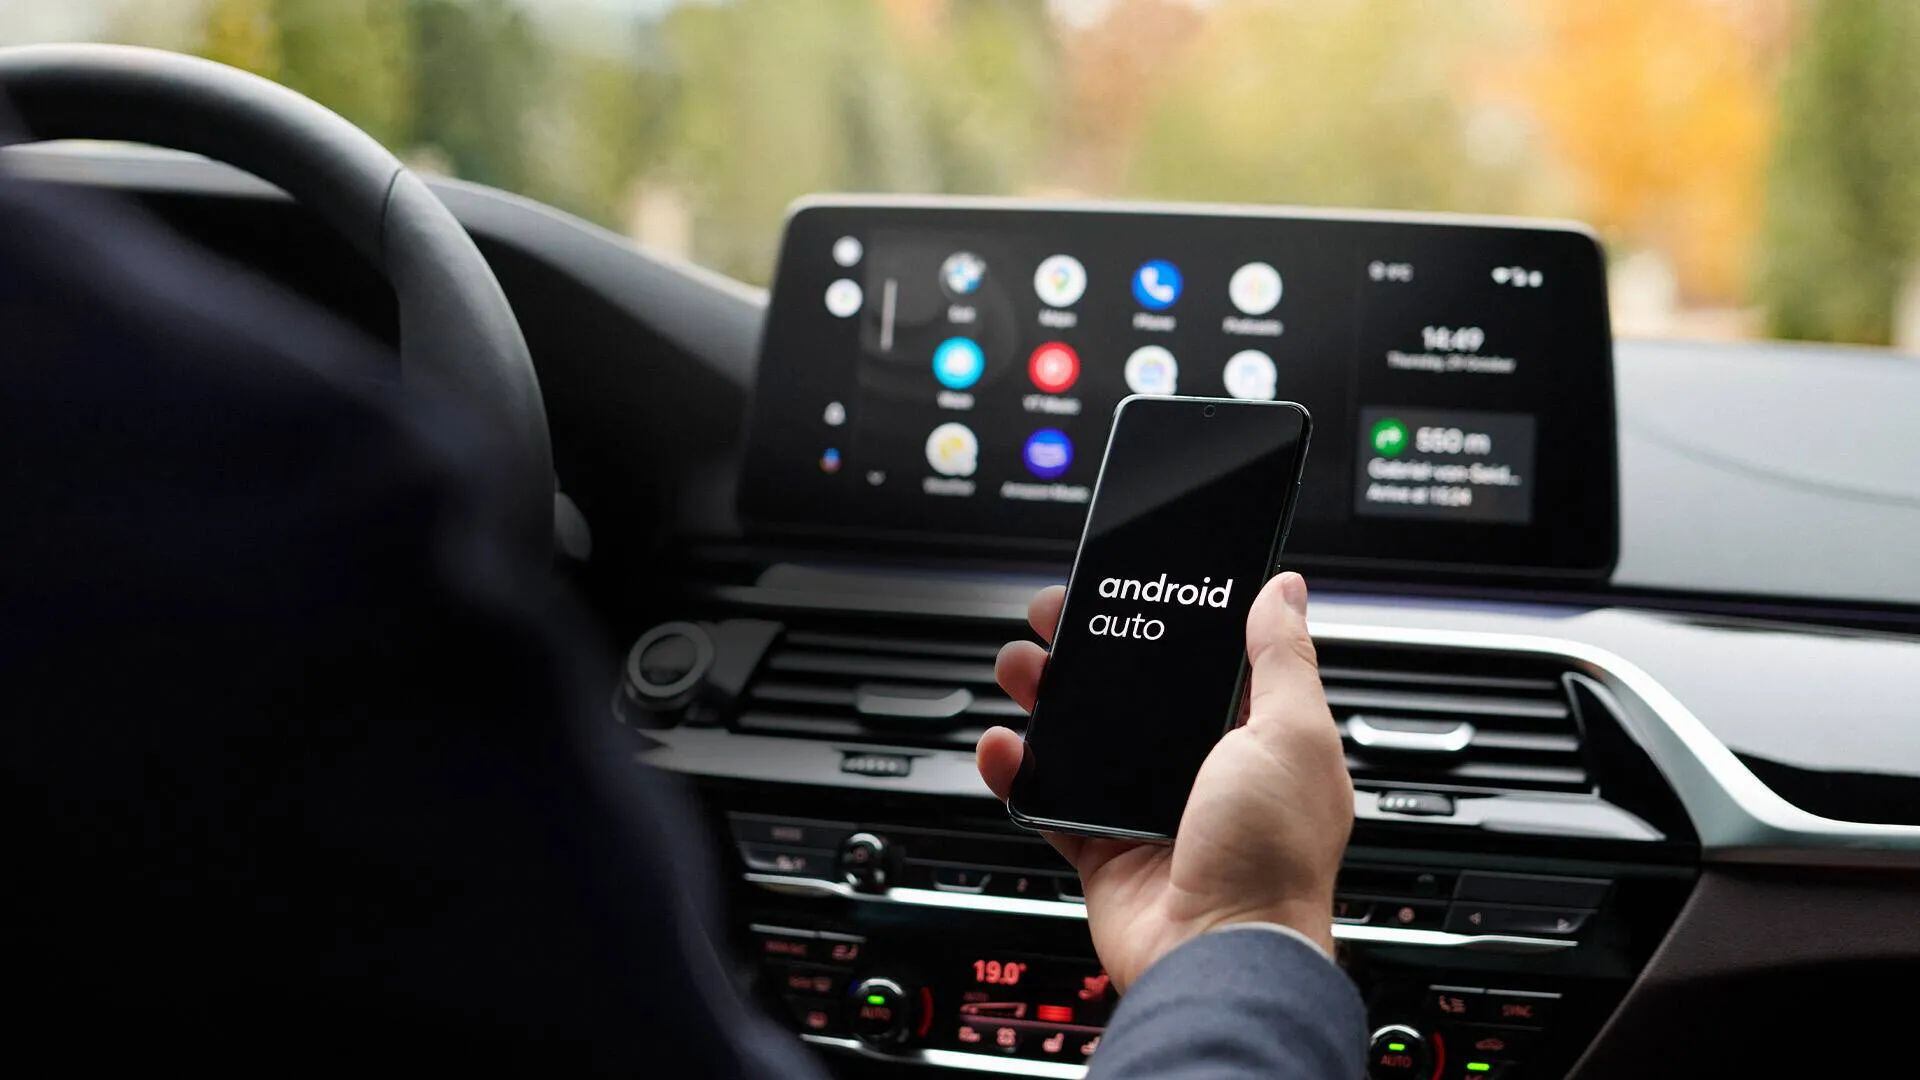 Guide to install the Android Auto 9.6 beta on your cell phone